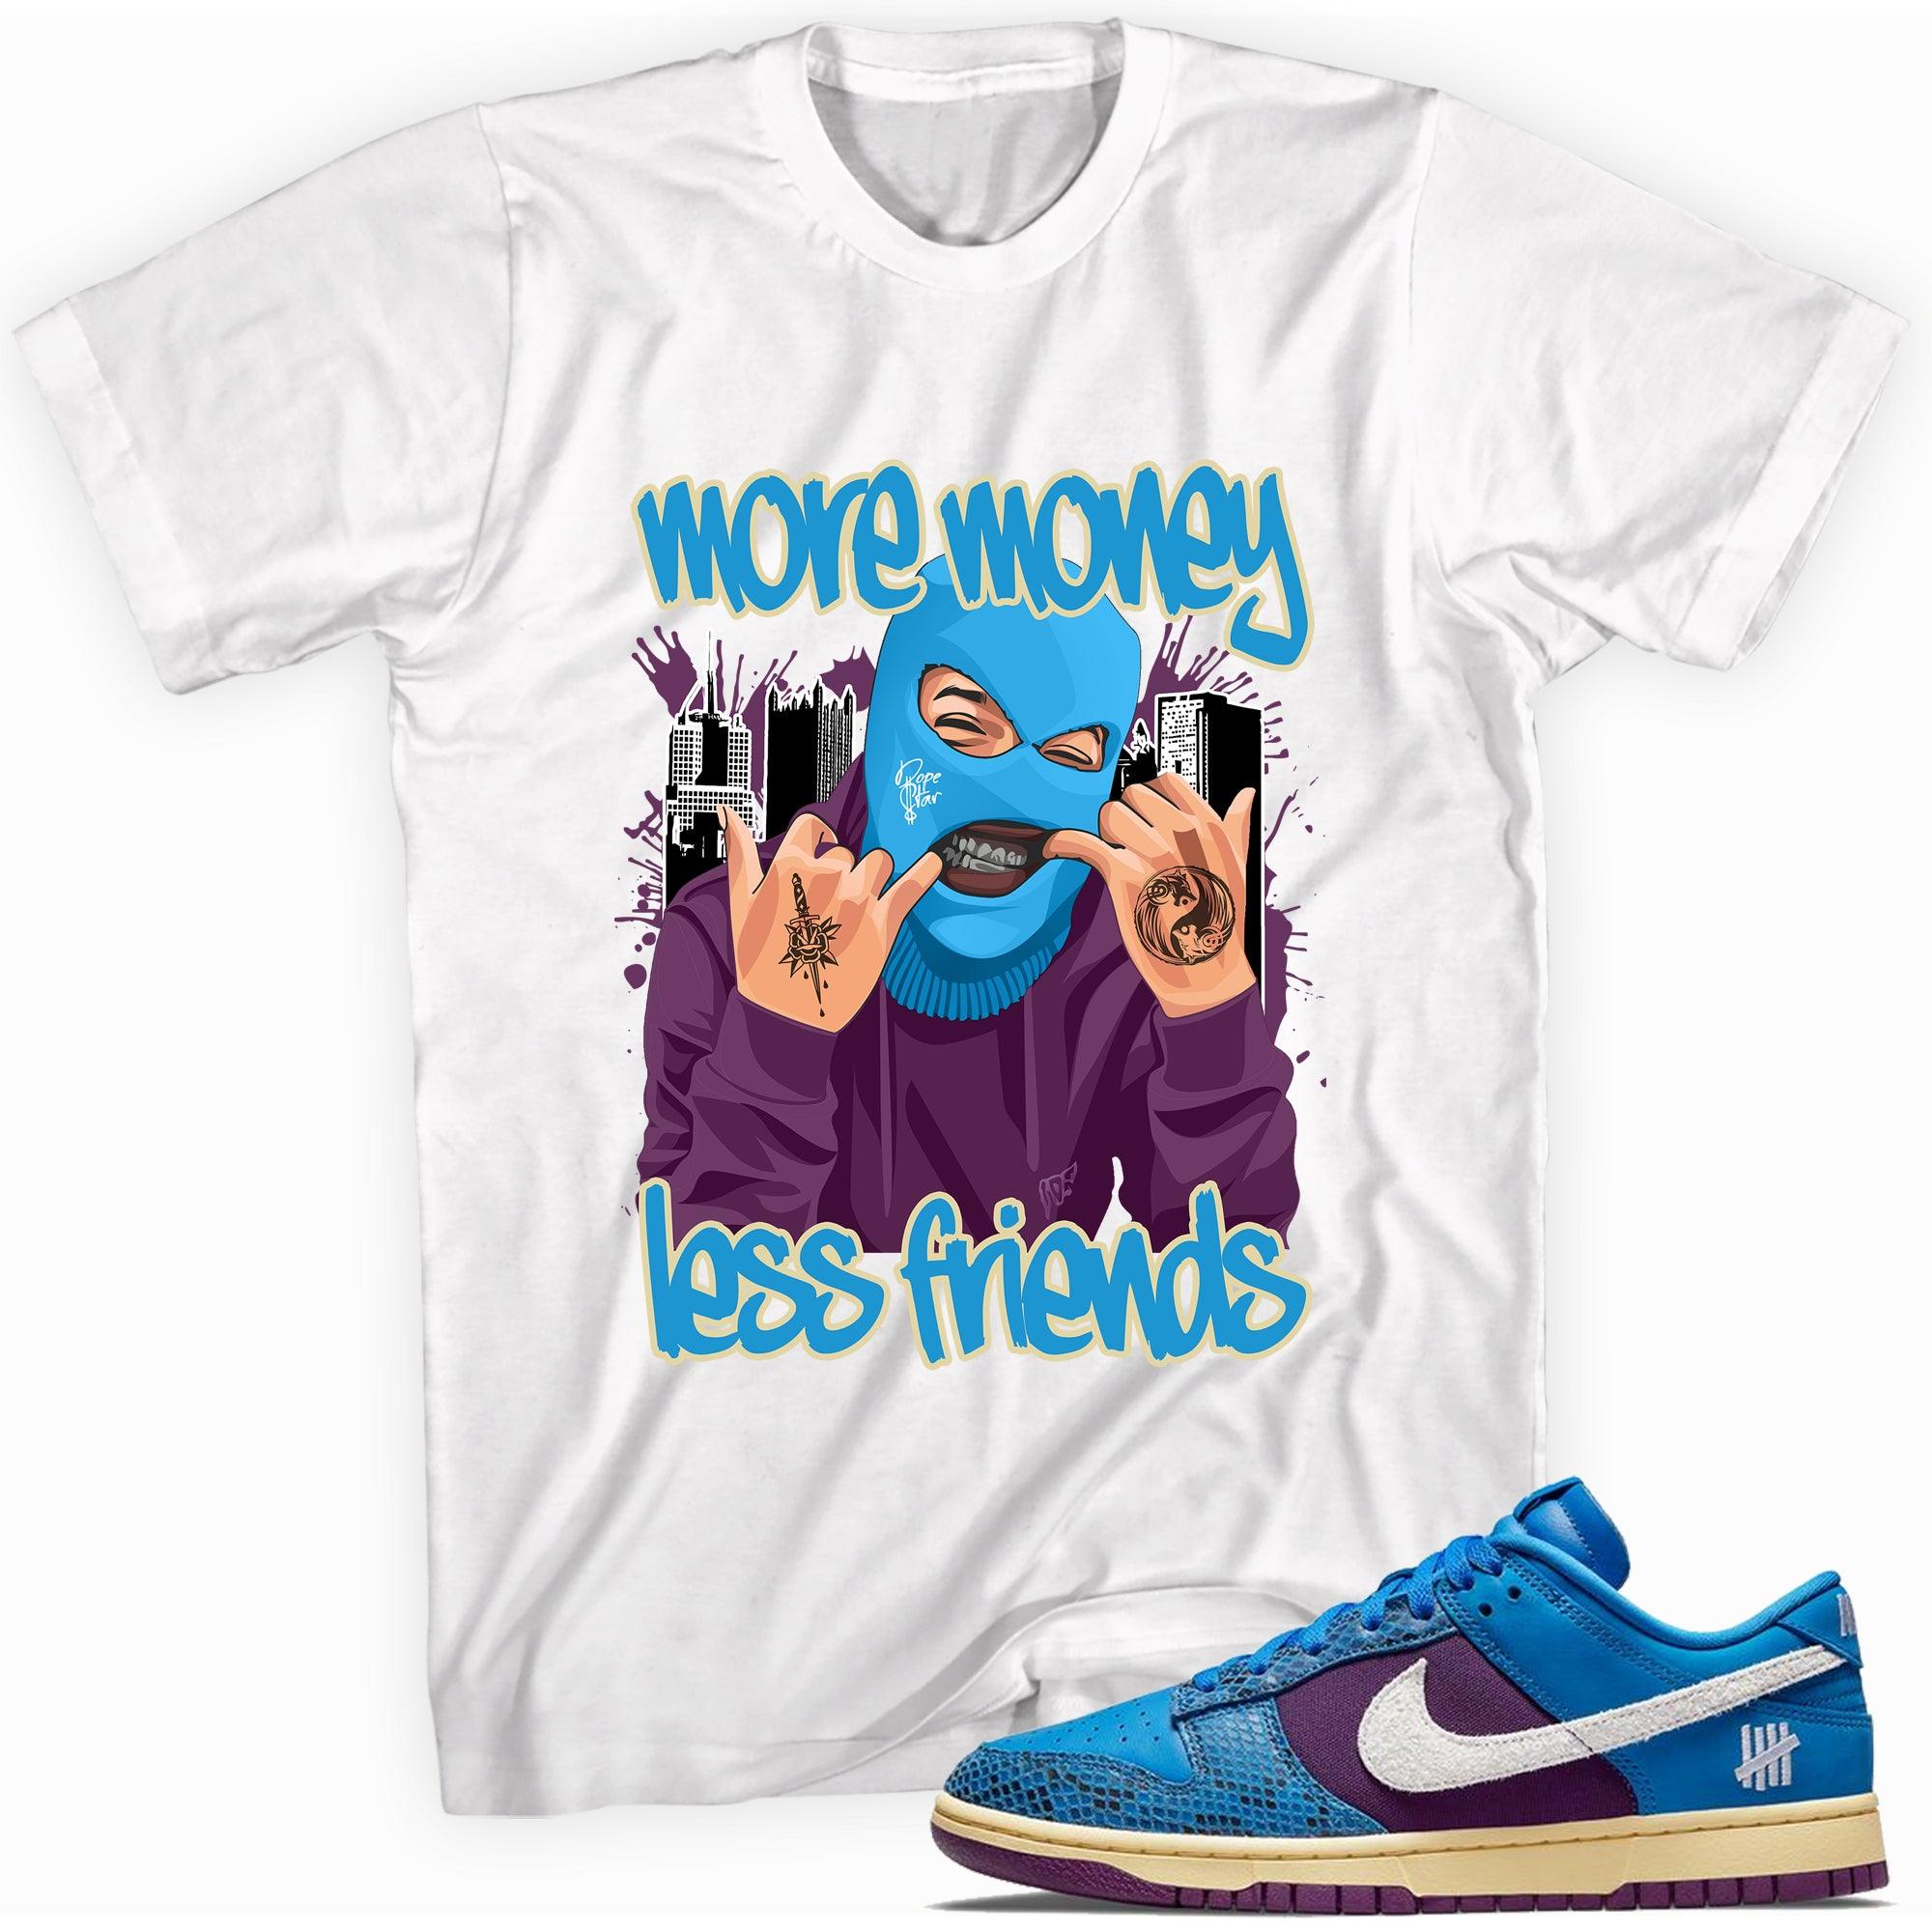 More Money Less Friends Shirt Dunk Low Undefeated 5 On It Dunk vs AF1 photo